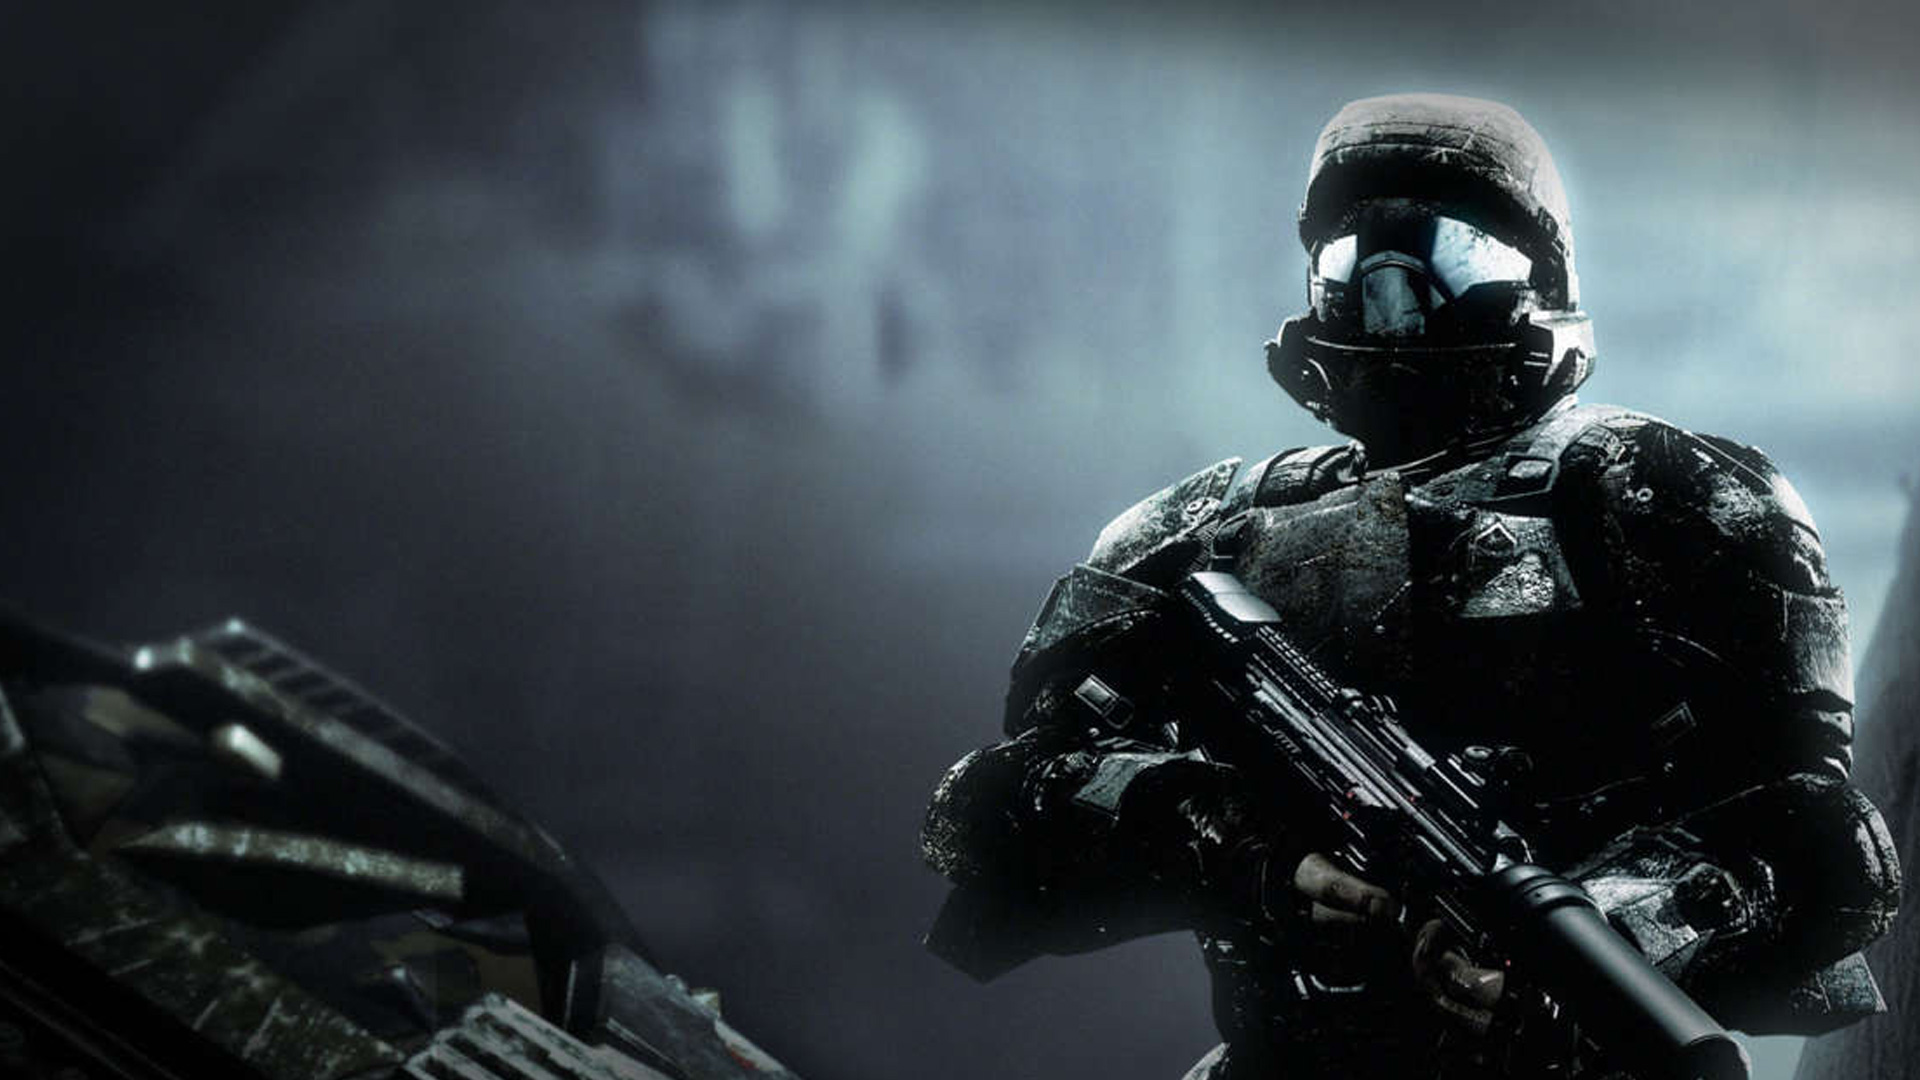 Halo 3: ODST Wallpaper Cover